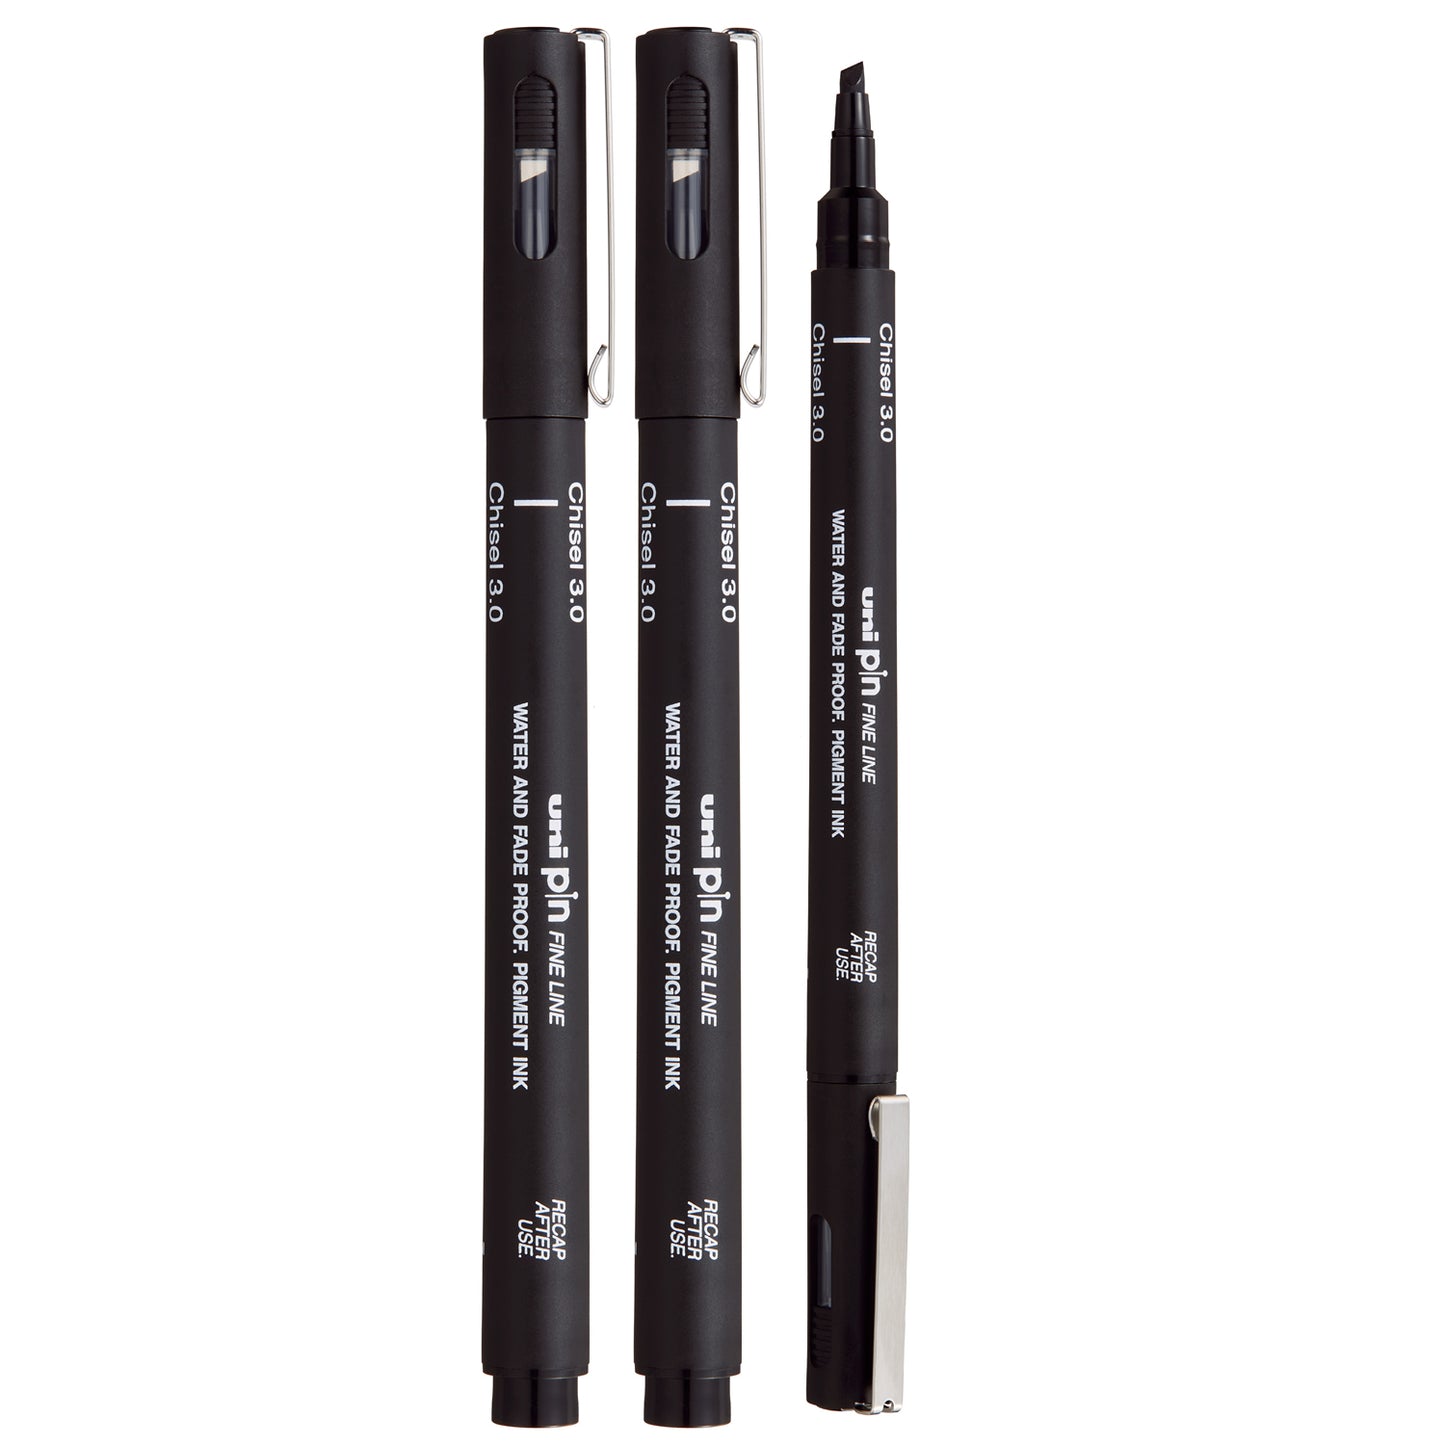 Uni Pin Chisel 3.0mm Fine Liner Drawing Pens (Pack of 3)